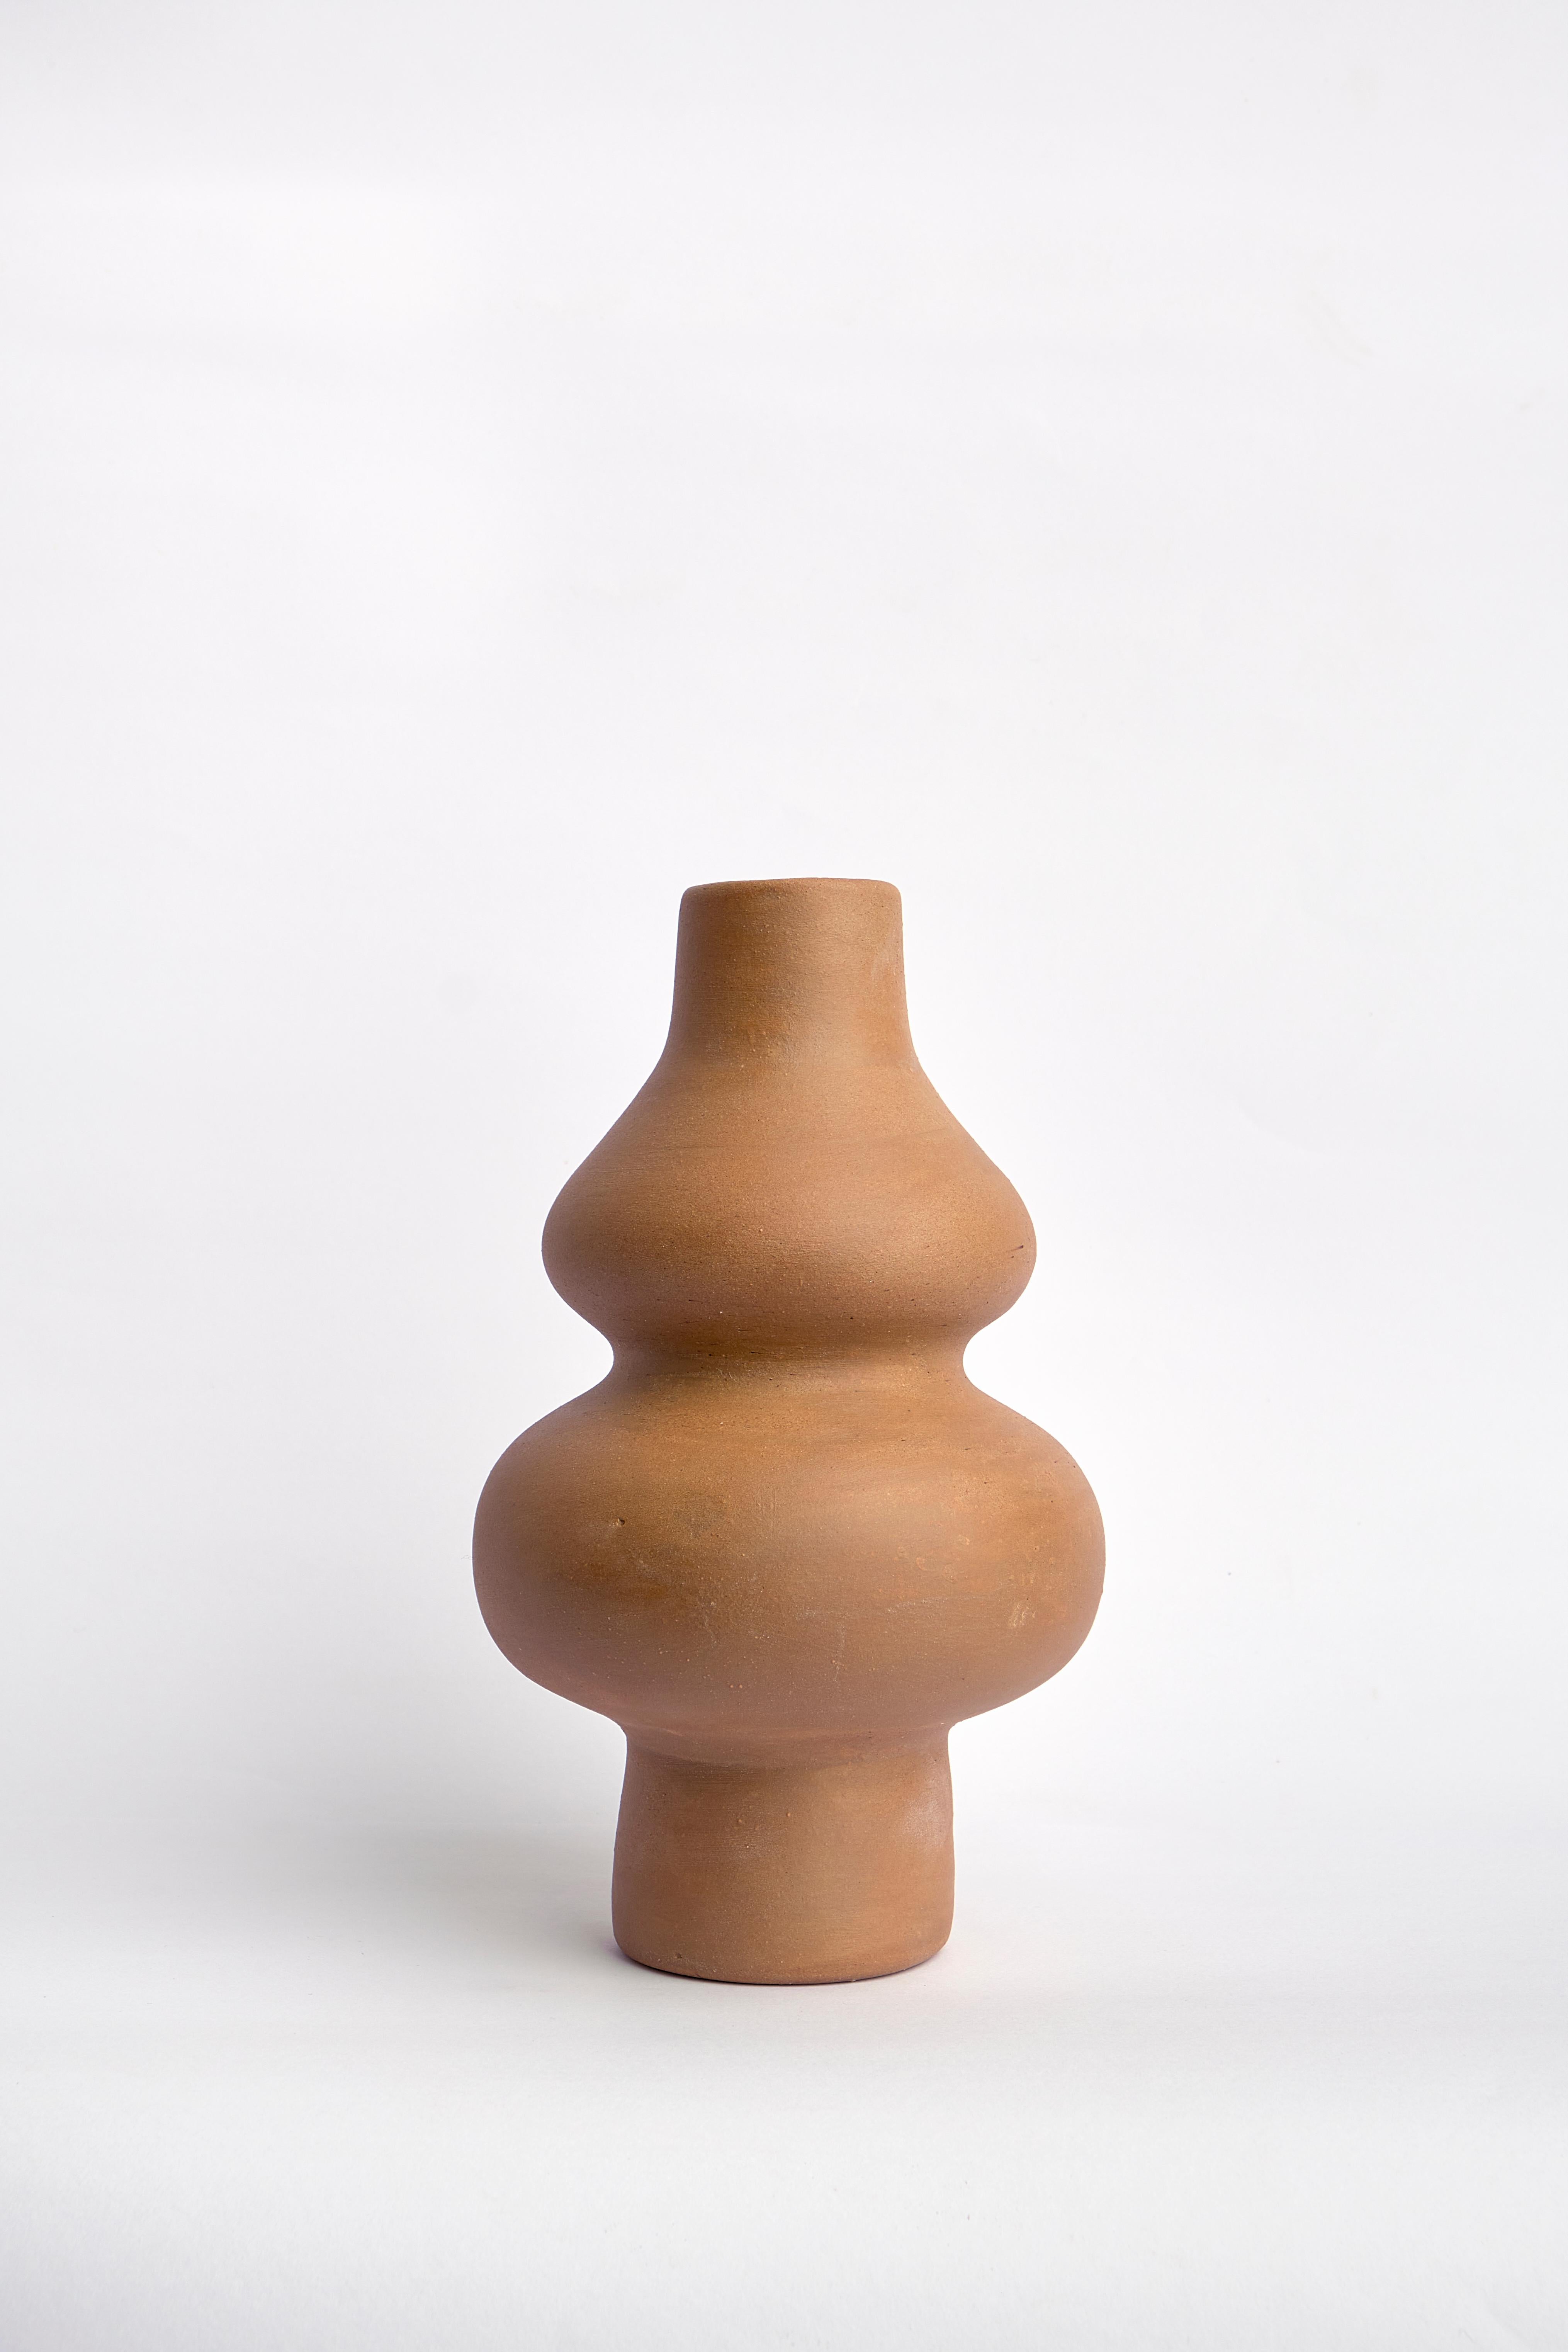 Ceramic sculptural vase from the centrifugal line for the permanent collection.

Aditional pictures are just references for other color possibilities: White Bone, Chocolate, Buttermilk, Charcoal Black, Glossy, Speckled Blue, Barro Tostado, Natural.